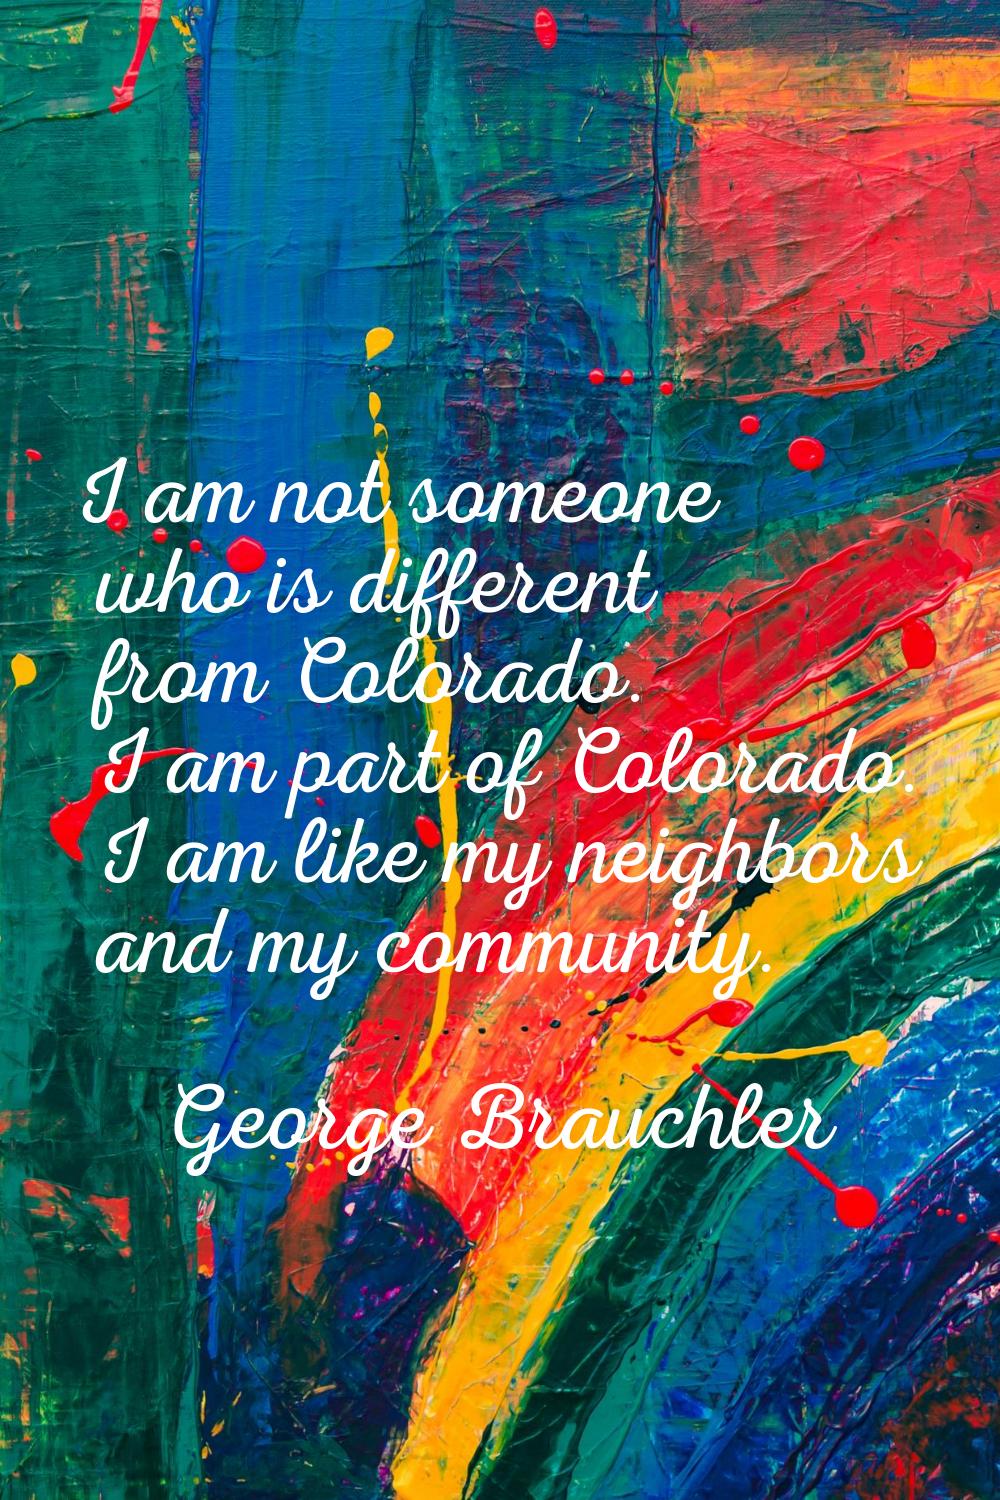 I am not someone who is different from Colorado. I am part of Colorado. I am like my neighbors and 